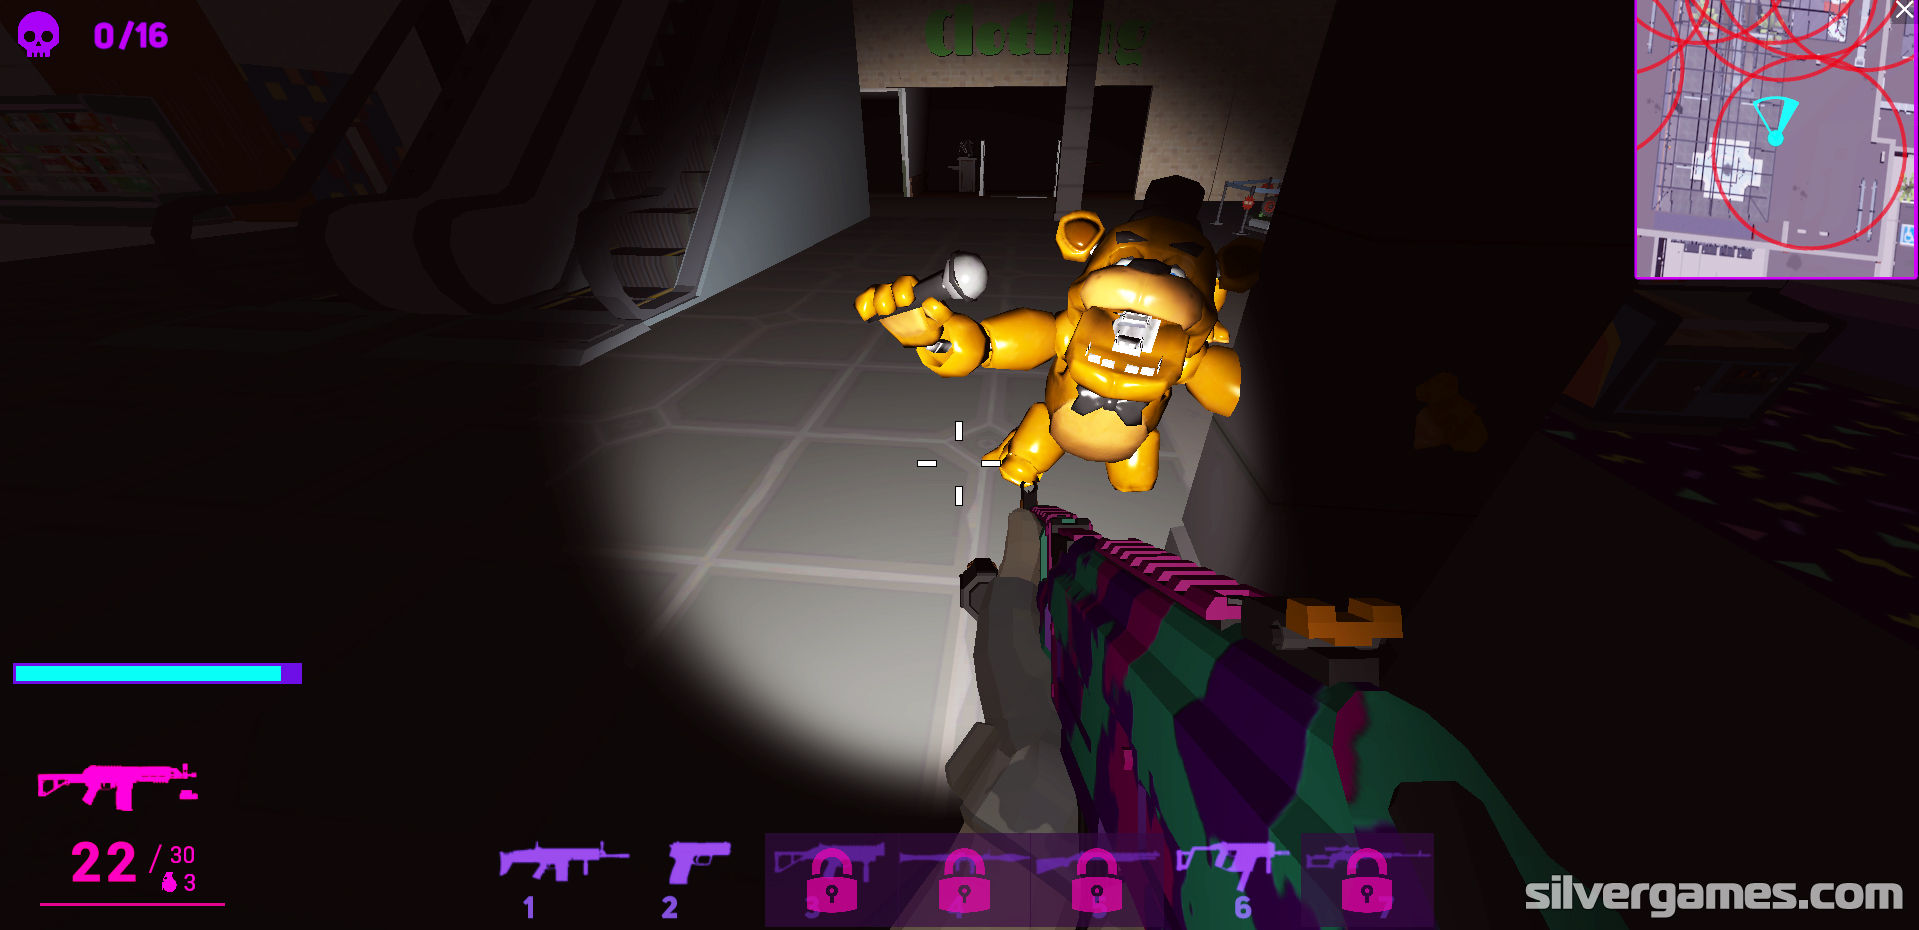 Five Nights at Freddy's - 🕹️ Online Game